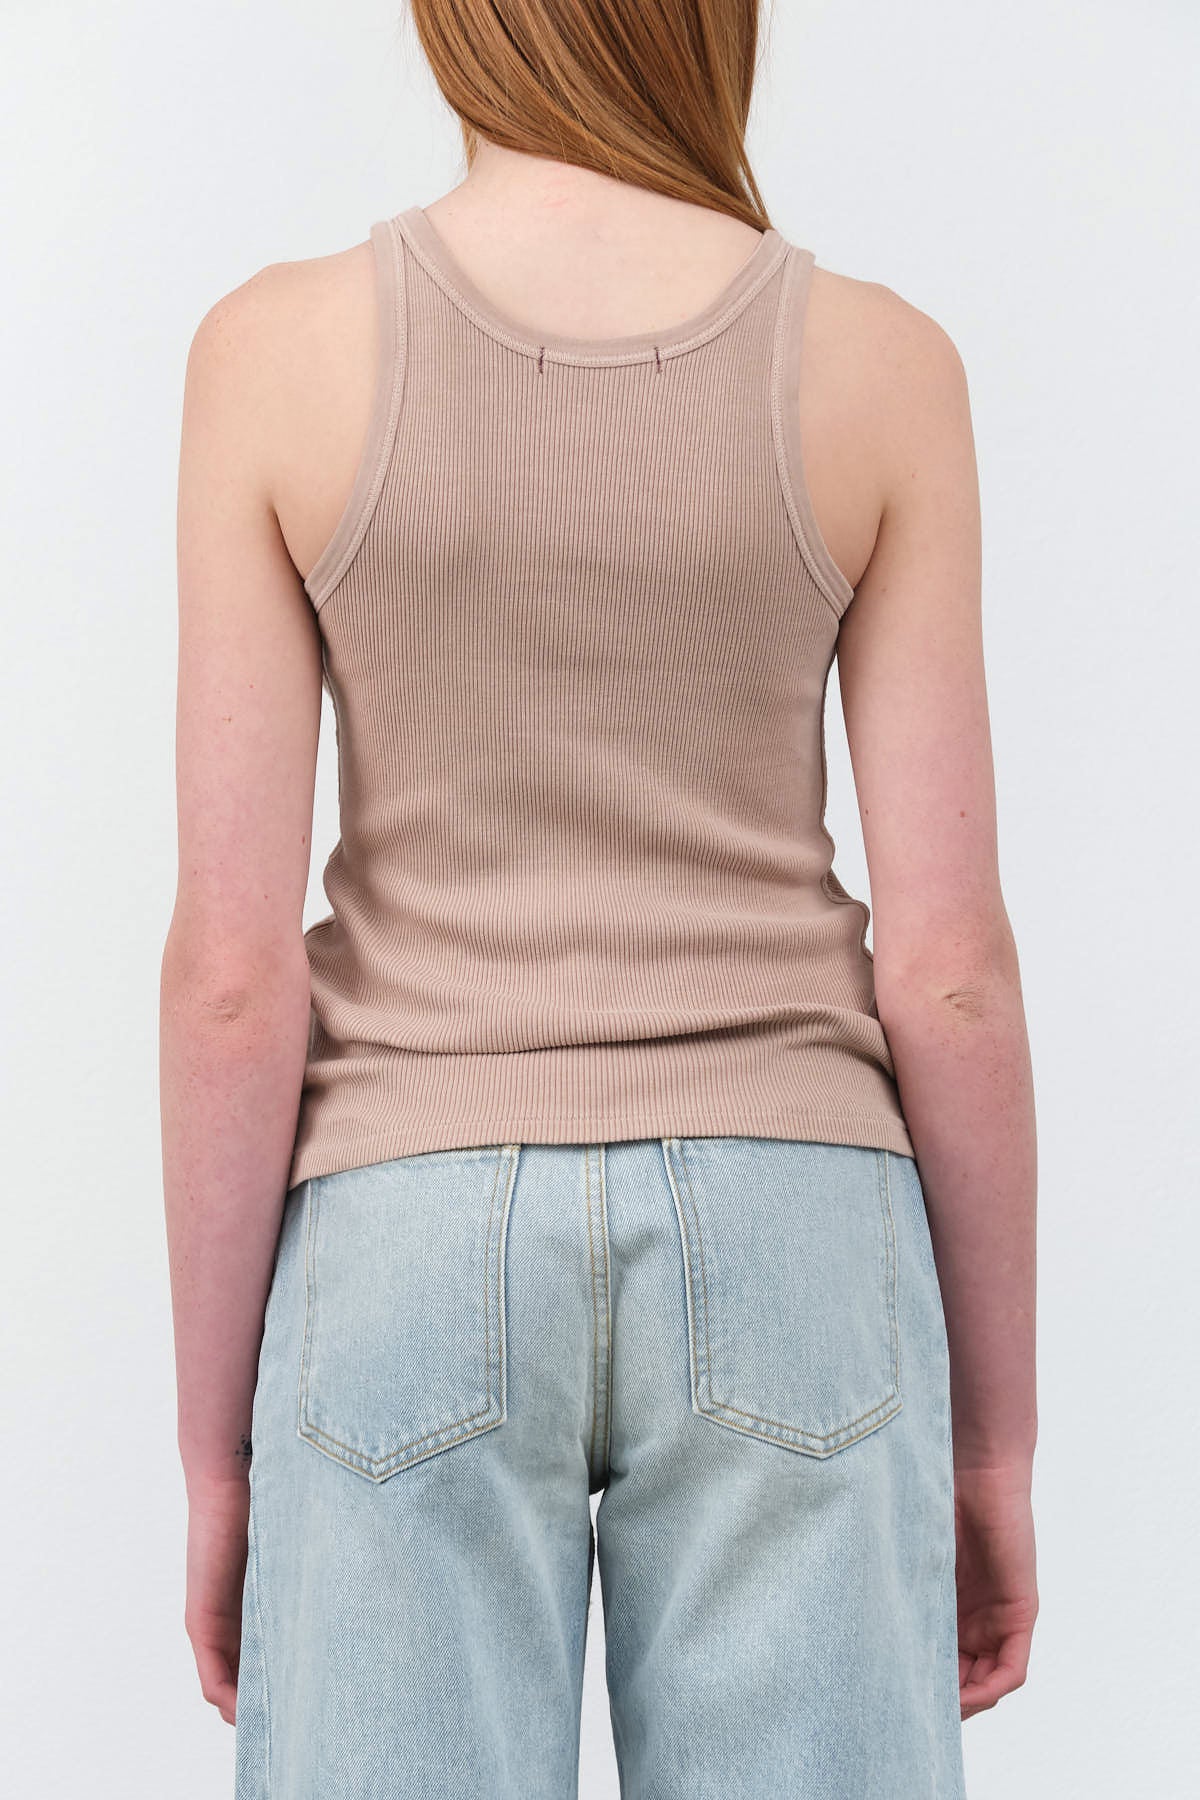 Back view of Long Rib Tank in Taupe